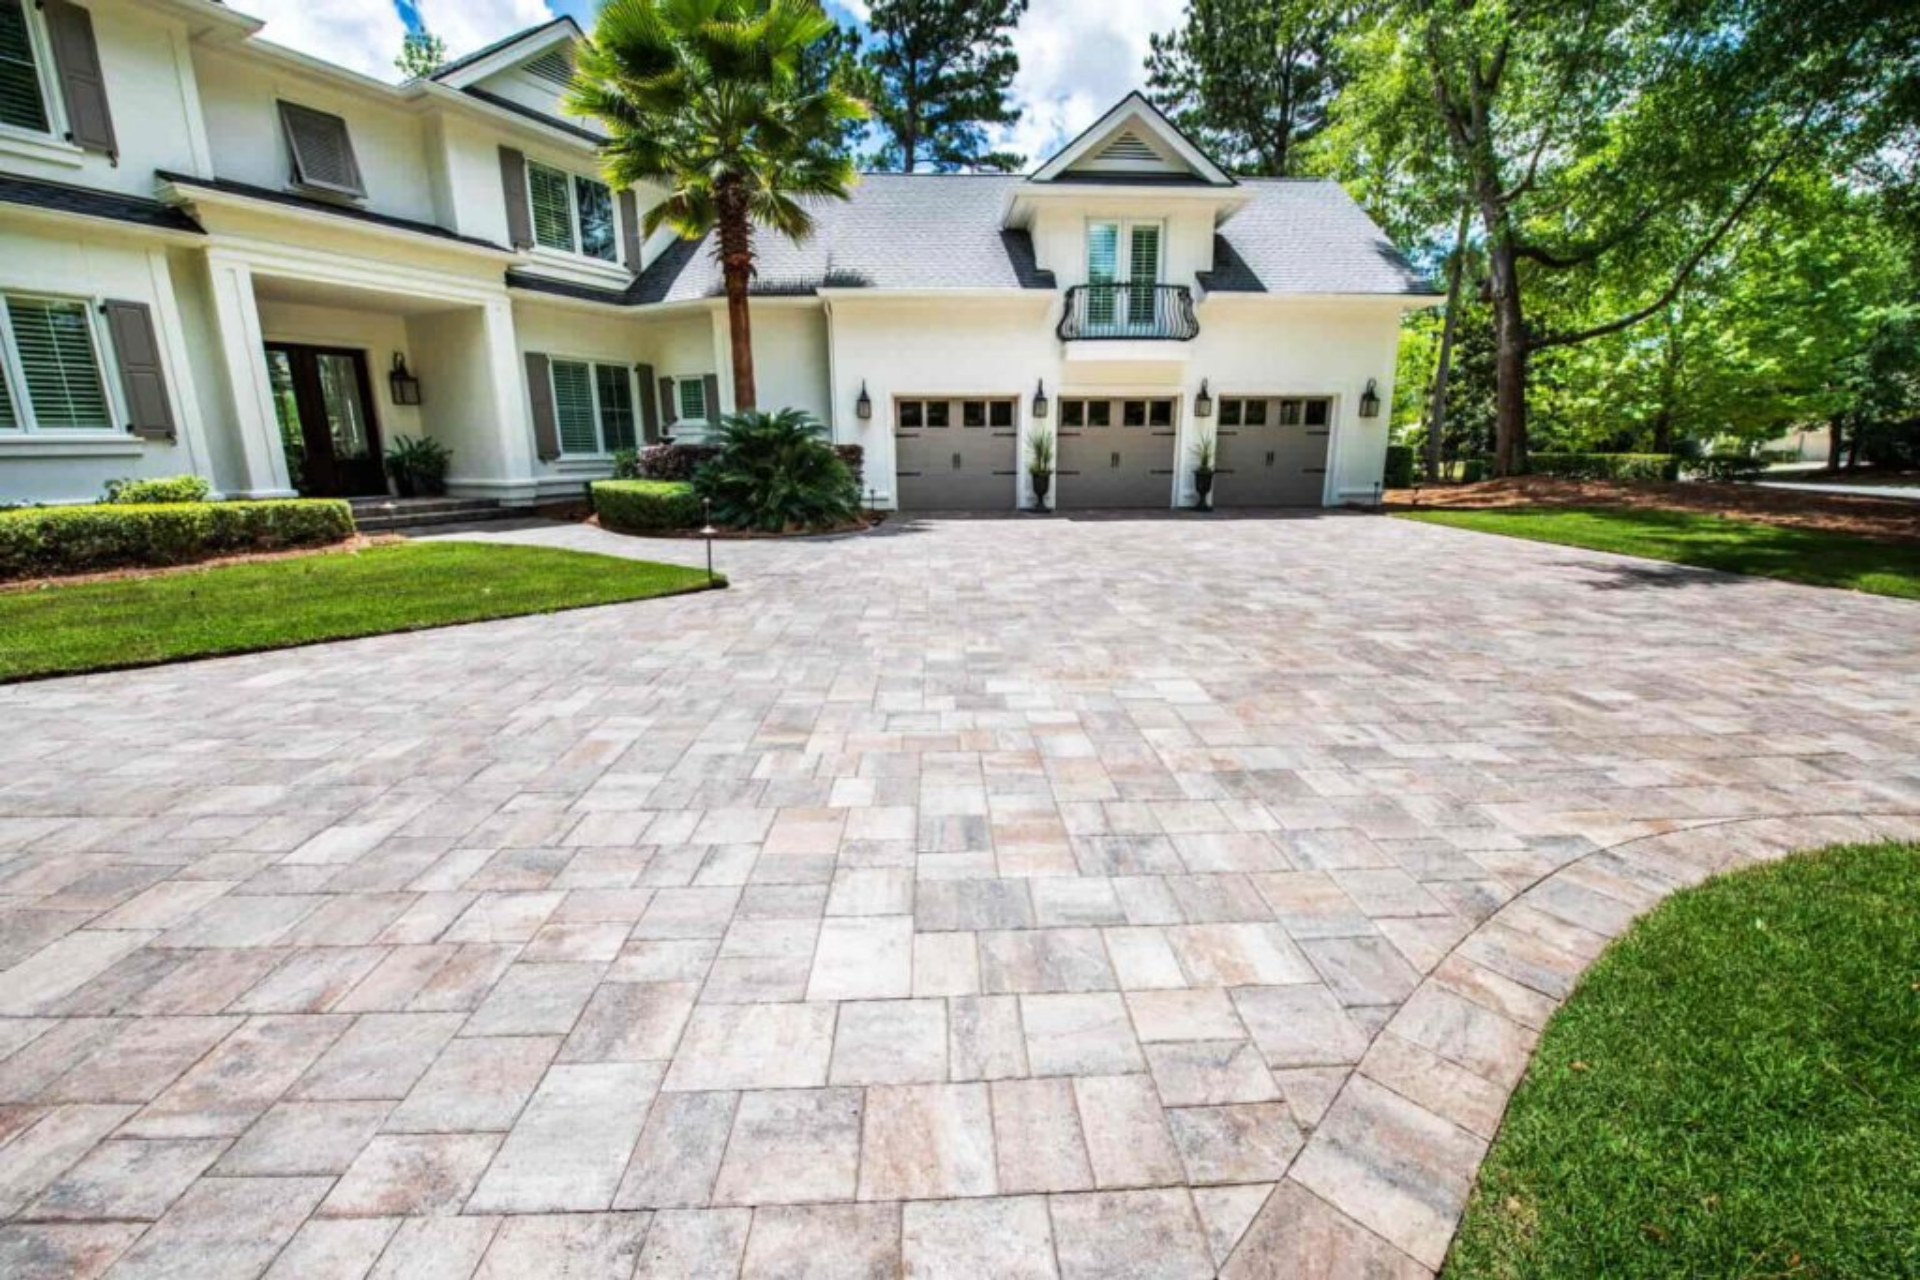 The Driveway Makeover To Keep Your Driveway Looking New